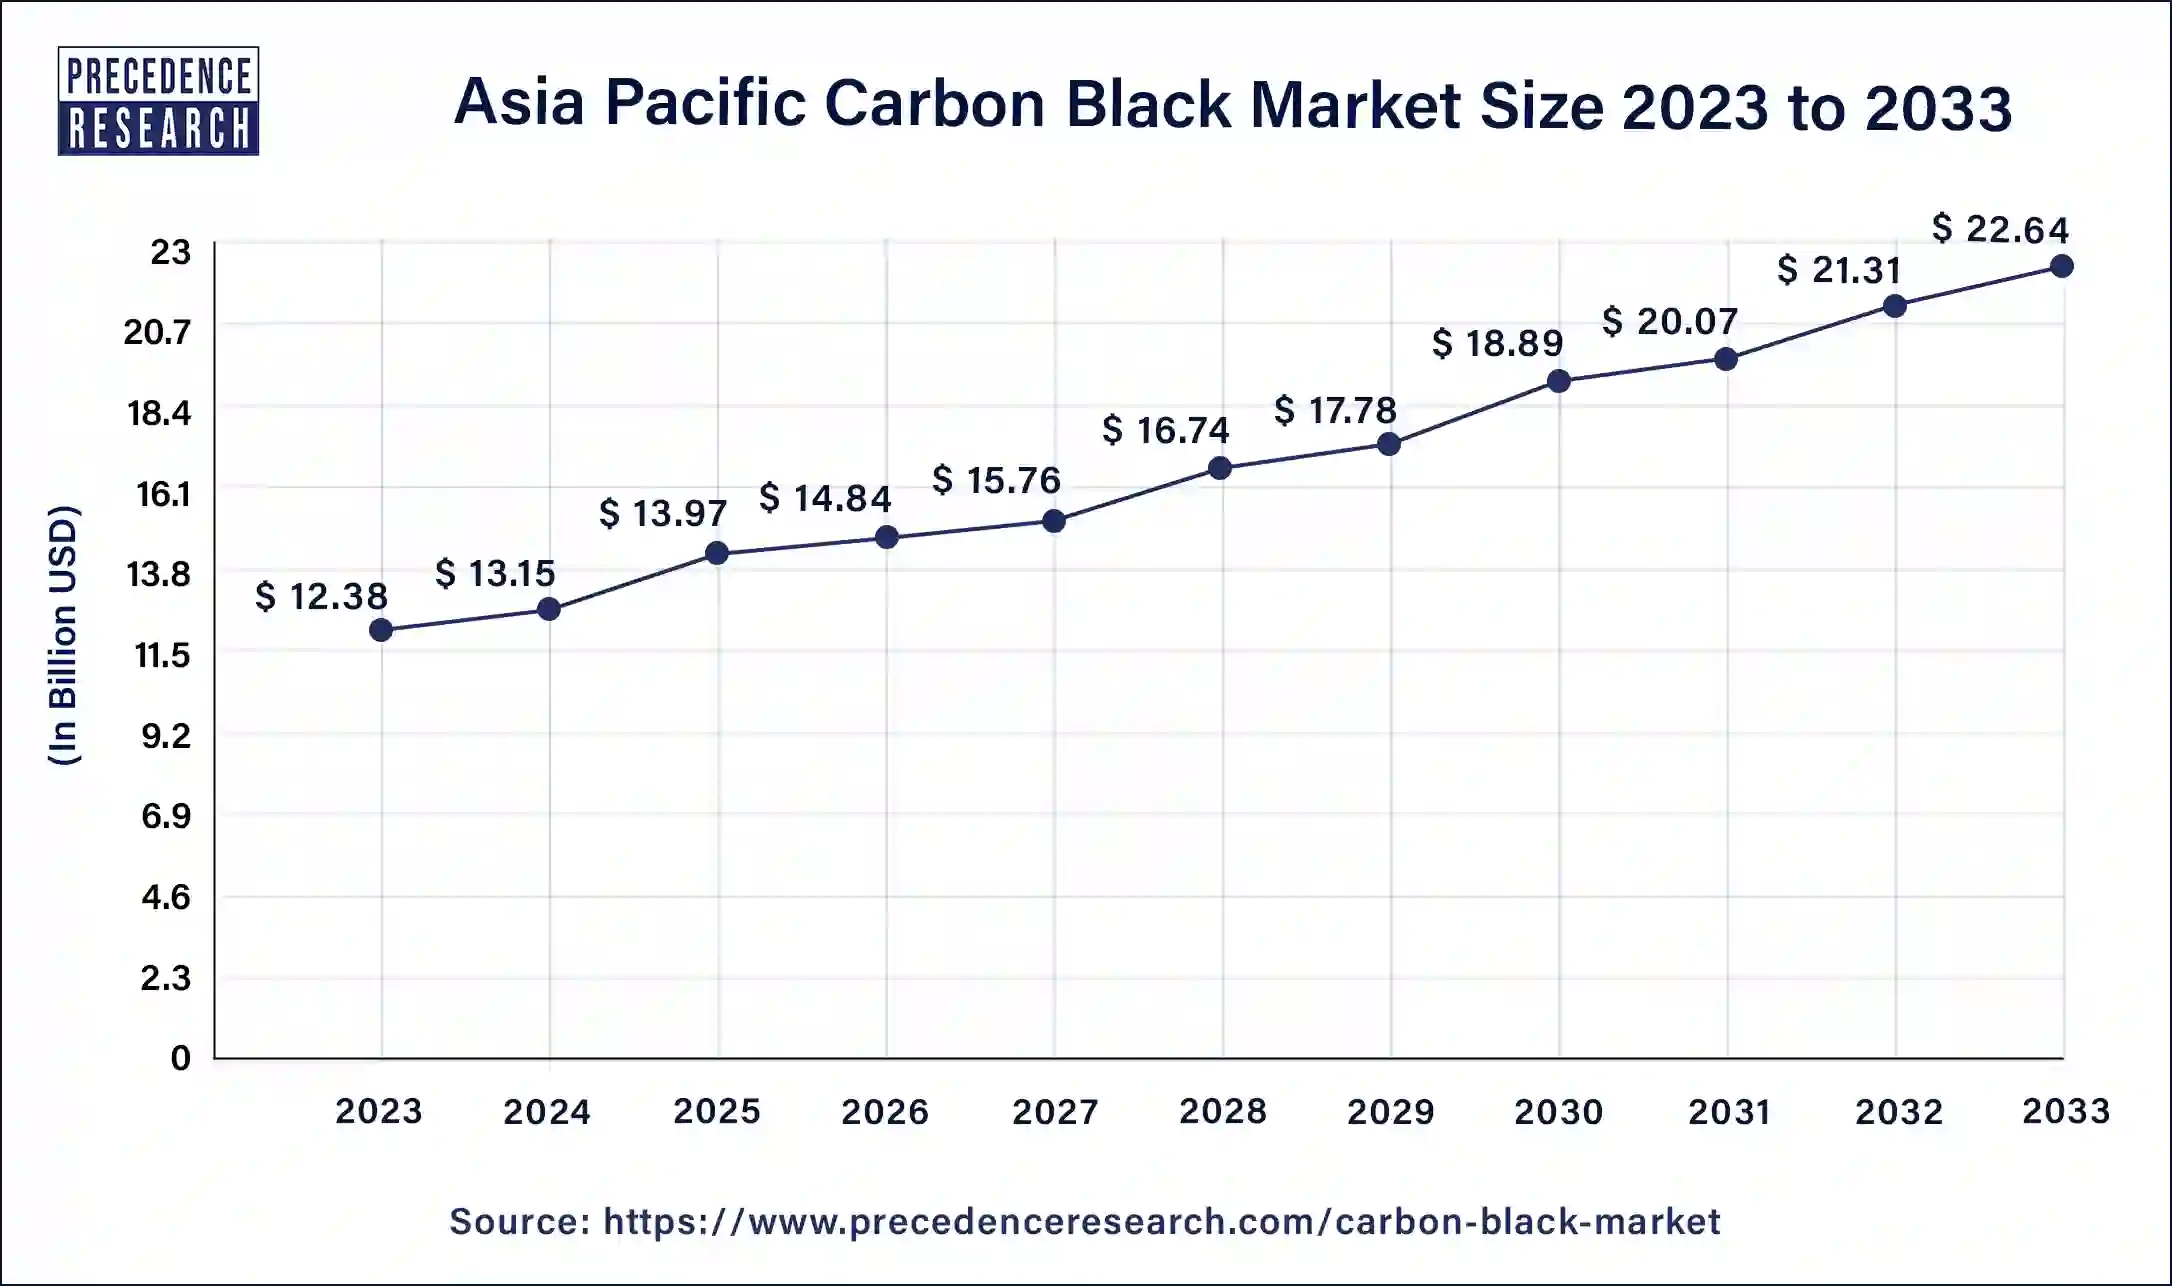 Asia Pacific Carbon Black Market Size 2024 to 2033